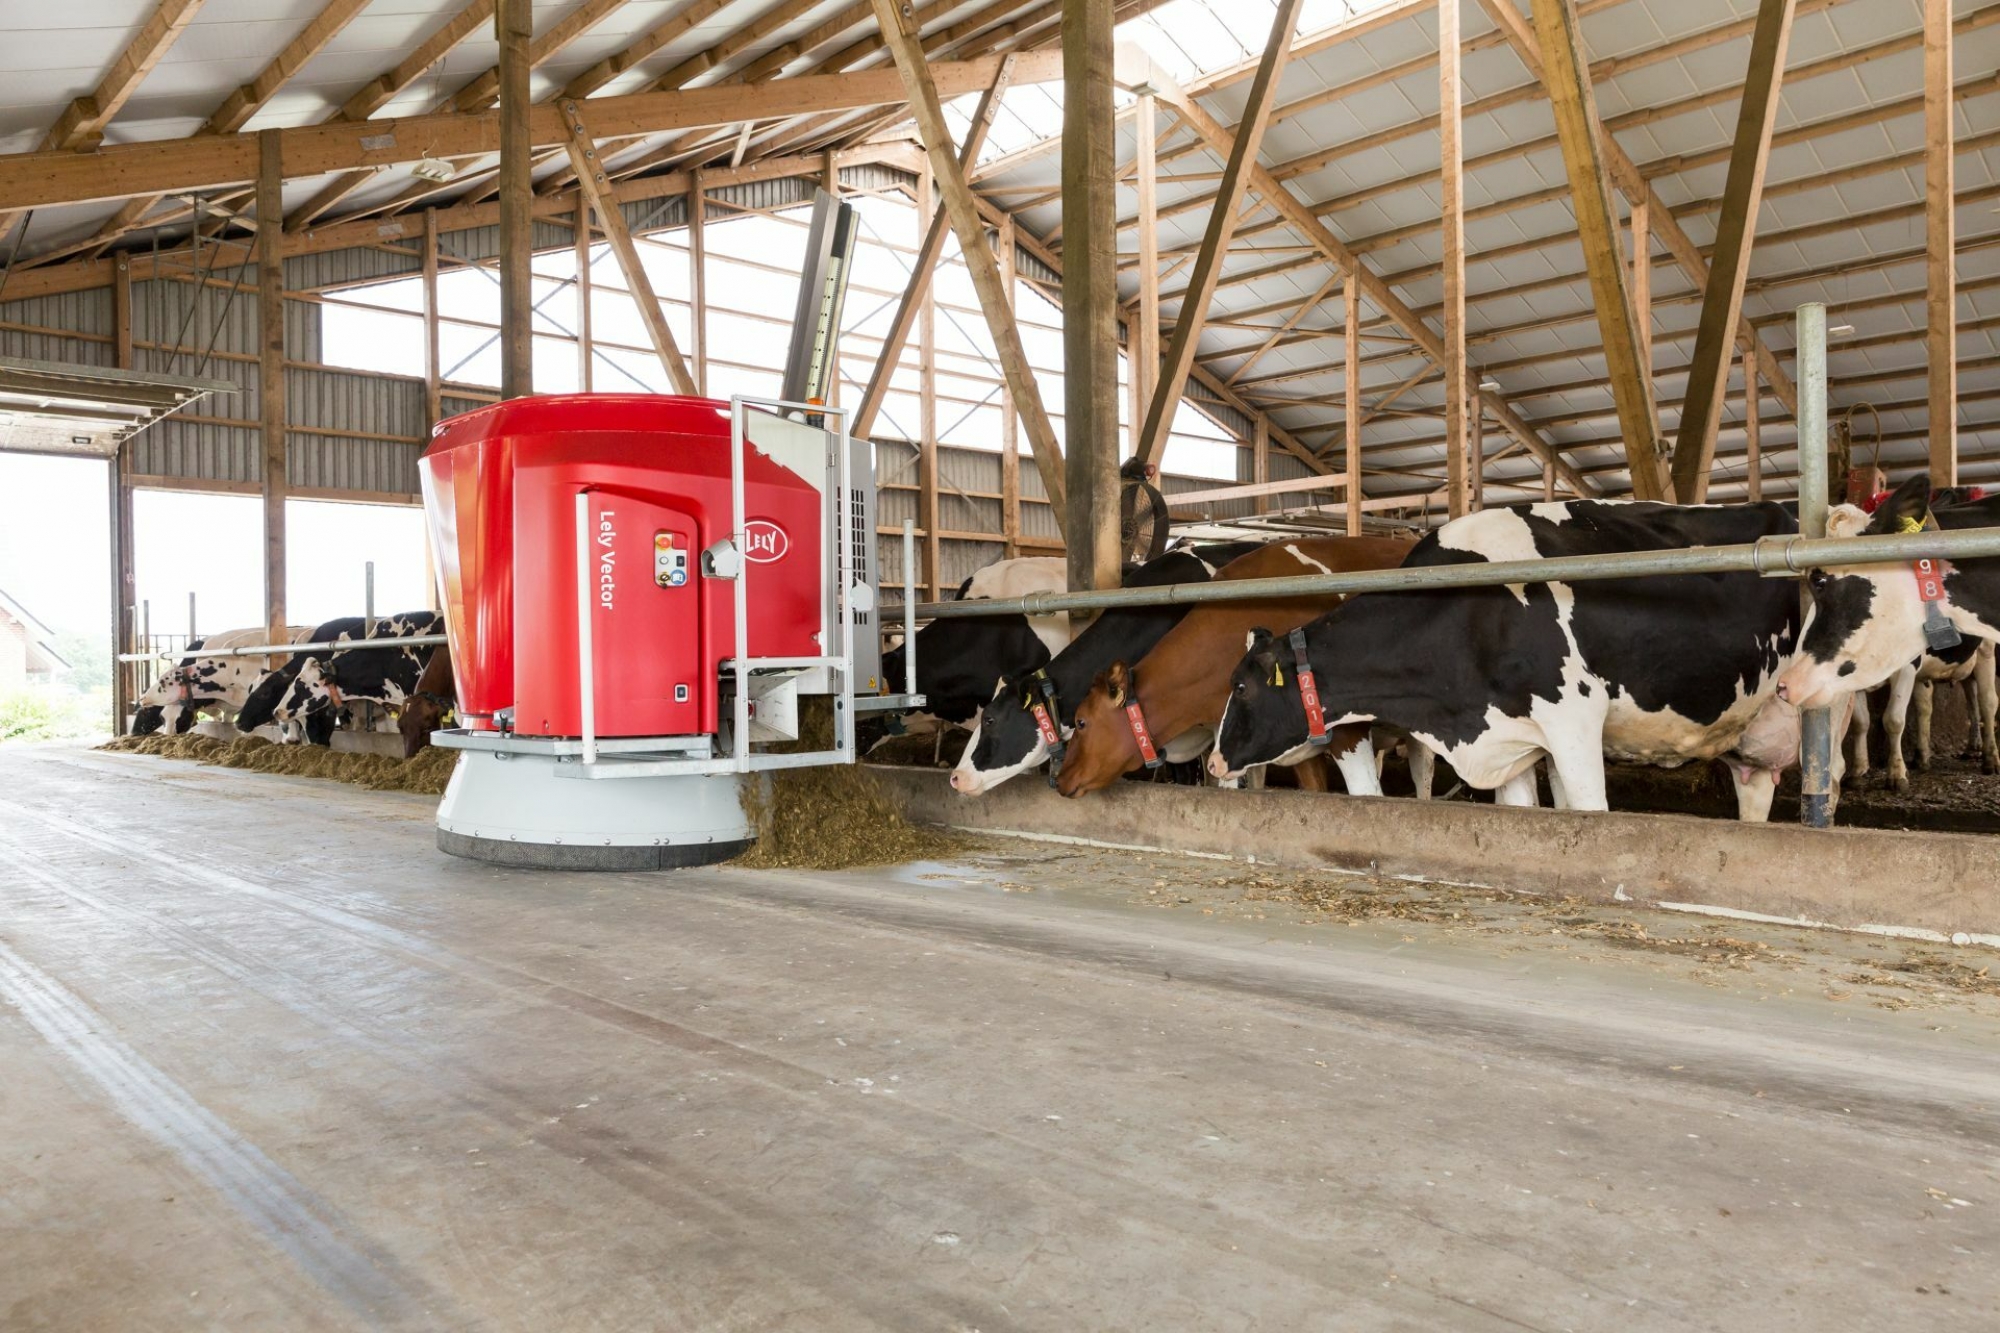 759c713c-lely-lely-lely-vector-duitsland-12-3379-rednumbers-1920px.jpeg